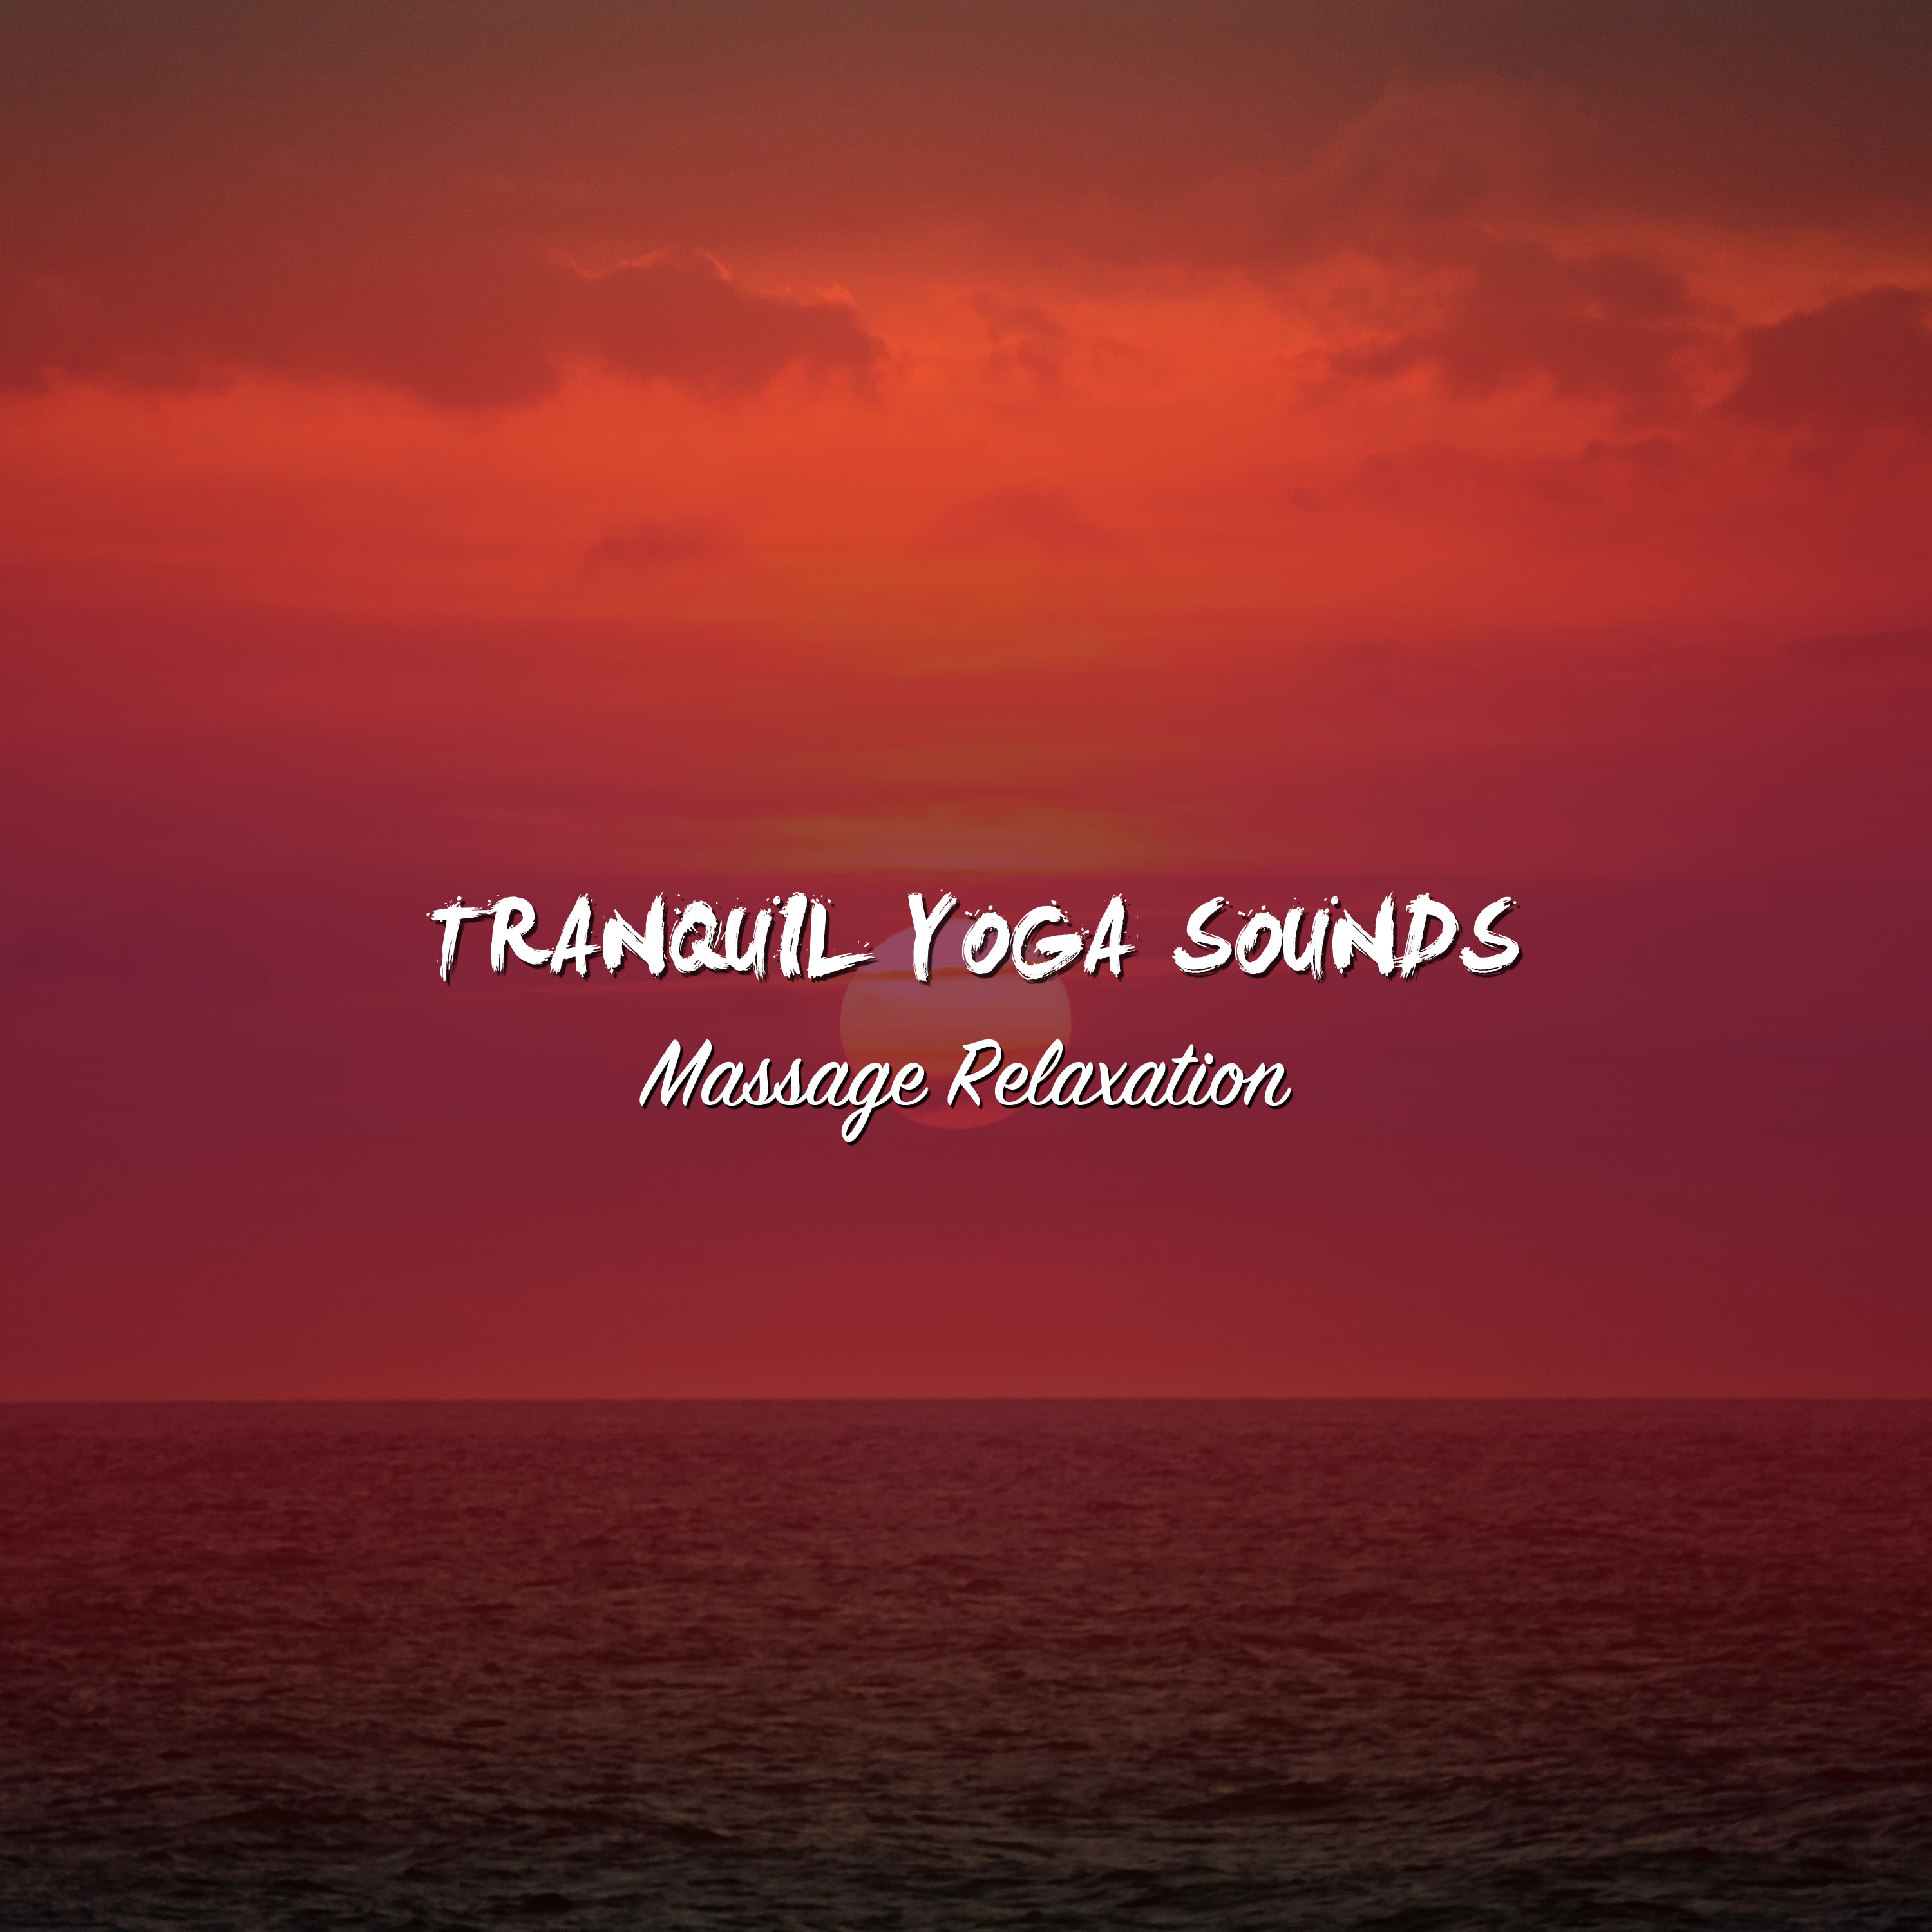 13 Tranquil Yoga Sounds: Massage Relaxation